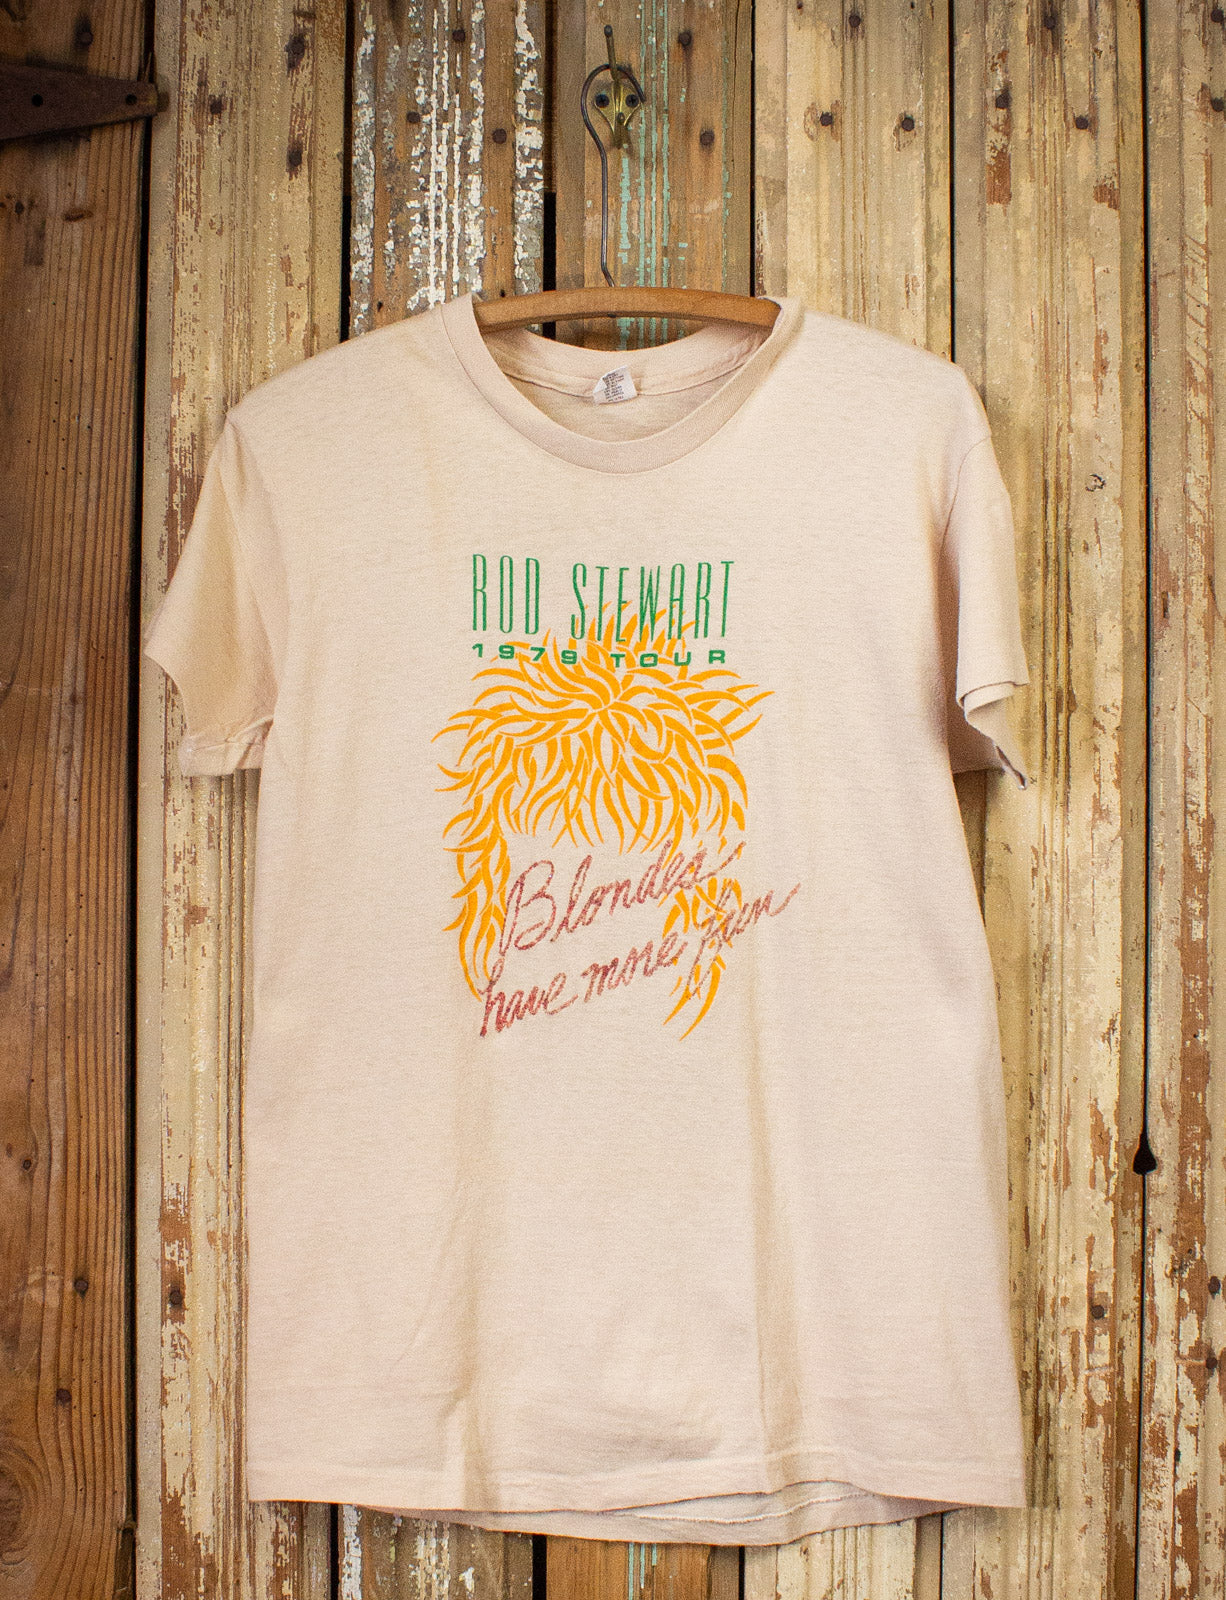 Vintage Rod Stewart Blondes Have More Fun Concert T Shirt 1979 Tan Small 